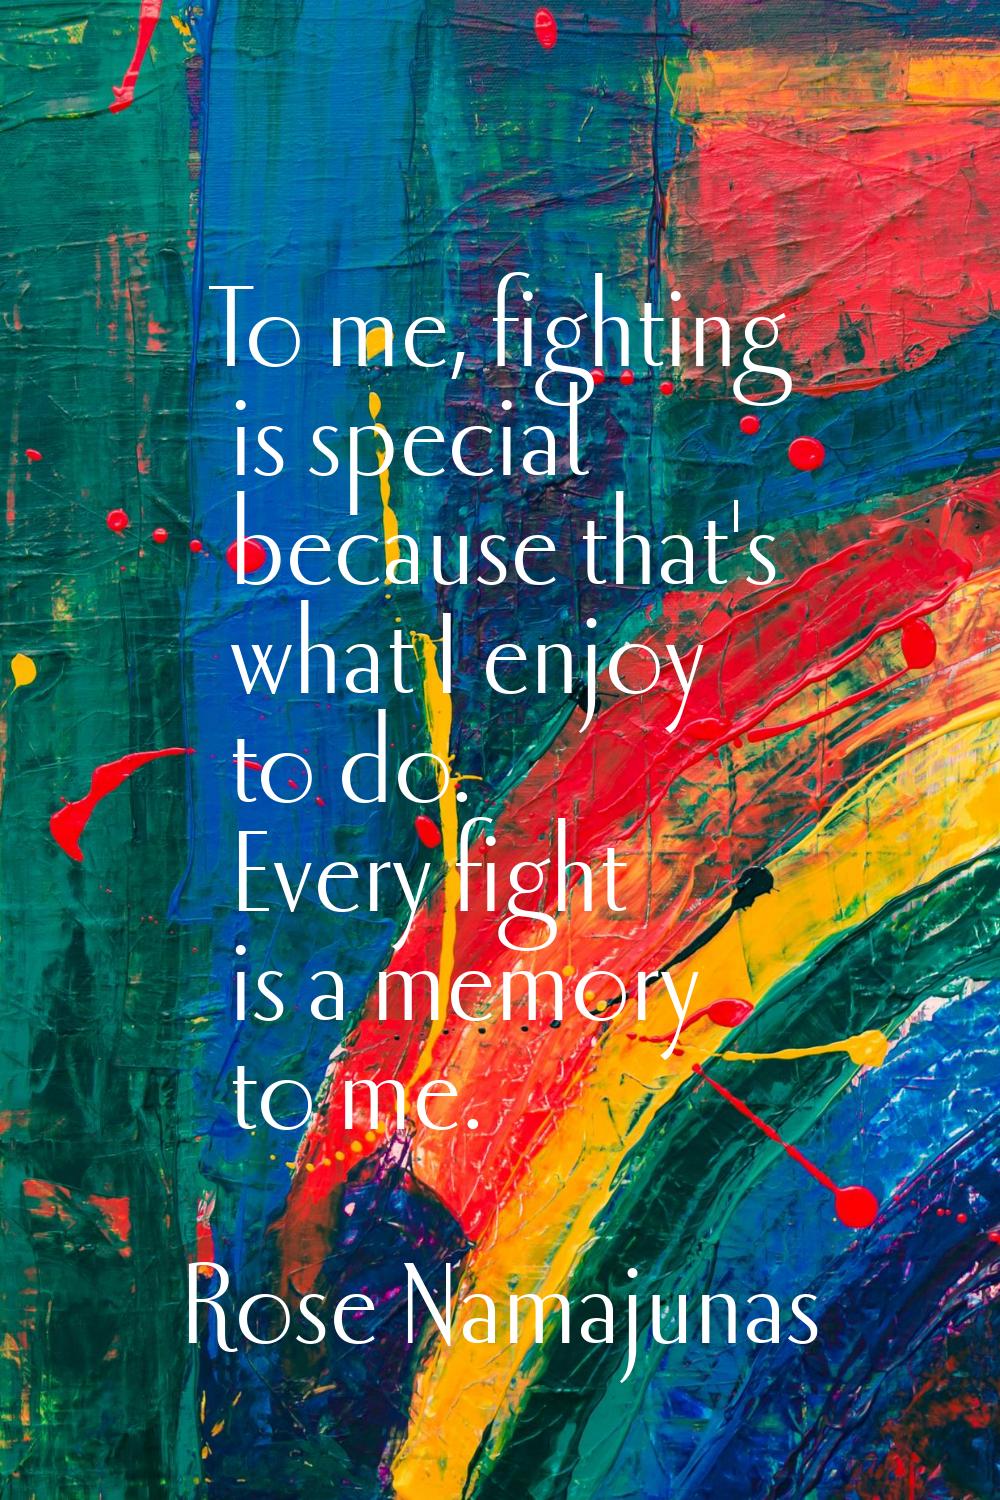 To me, fighting is special because that's what I enjoy to do. Every fight is a memory to me.